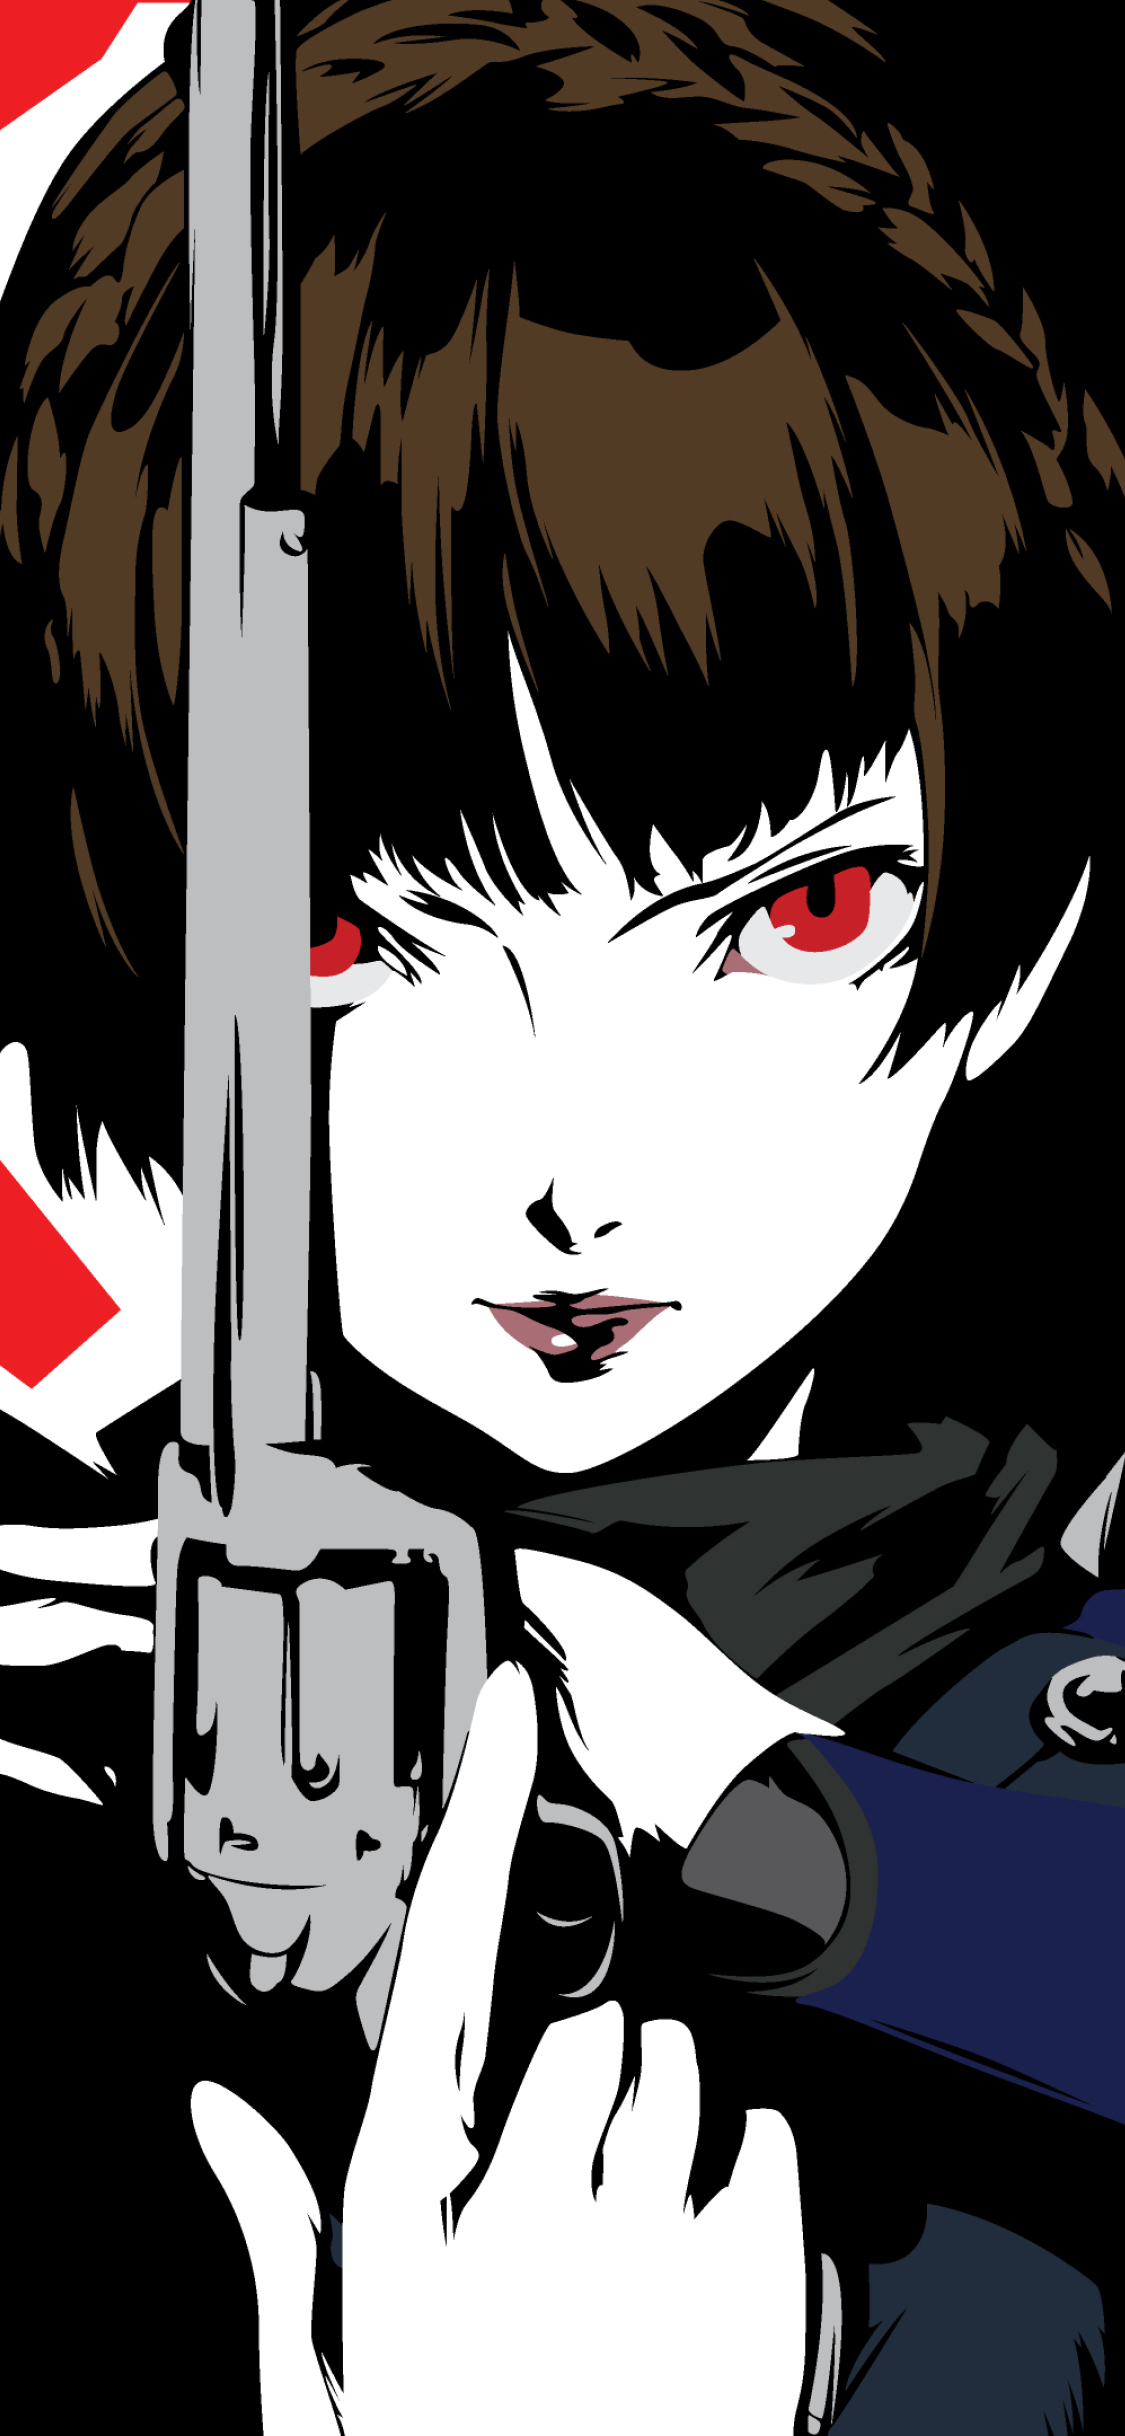 1125x2436 Queen Persona 5 Anime Girl 4k Iphone Xs Iphone 10 Iphone X Wallpaper Hd Anime 4k Wallpapers Images Photos And Background Wallpapers Den